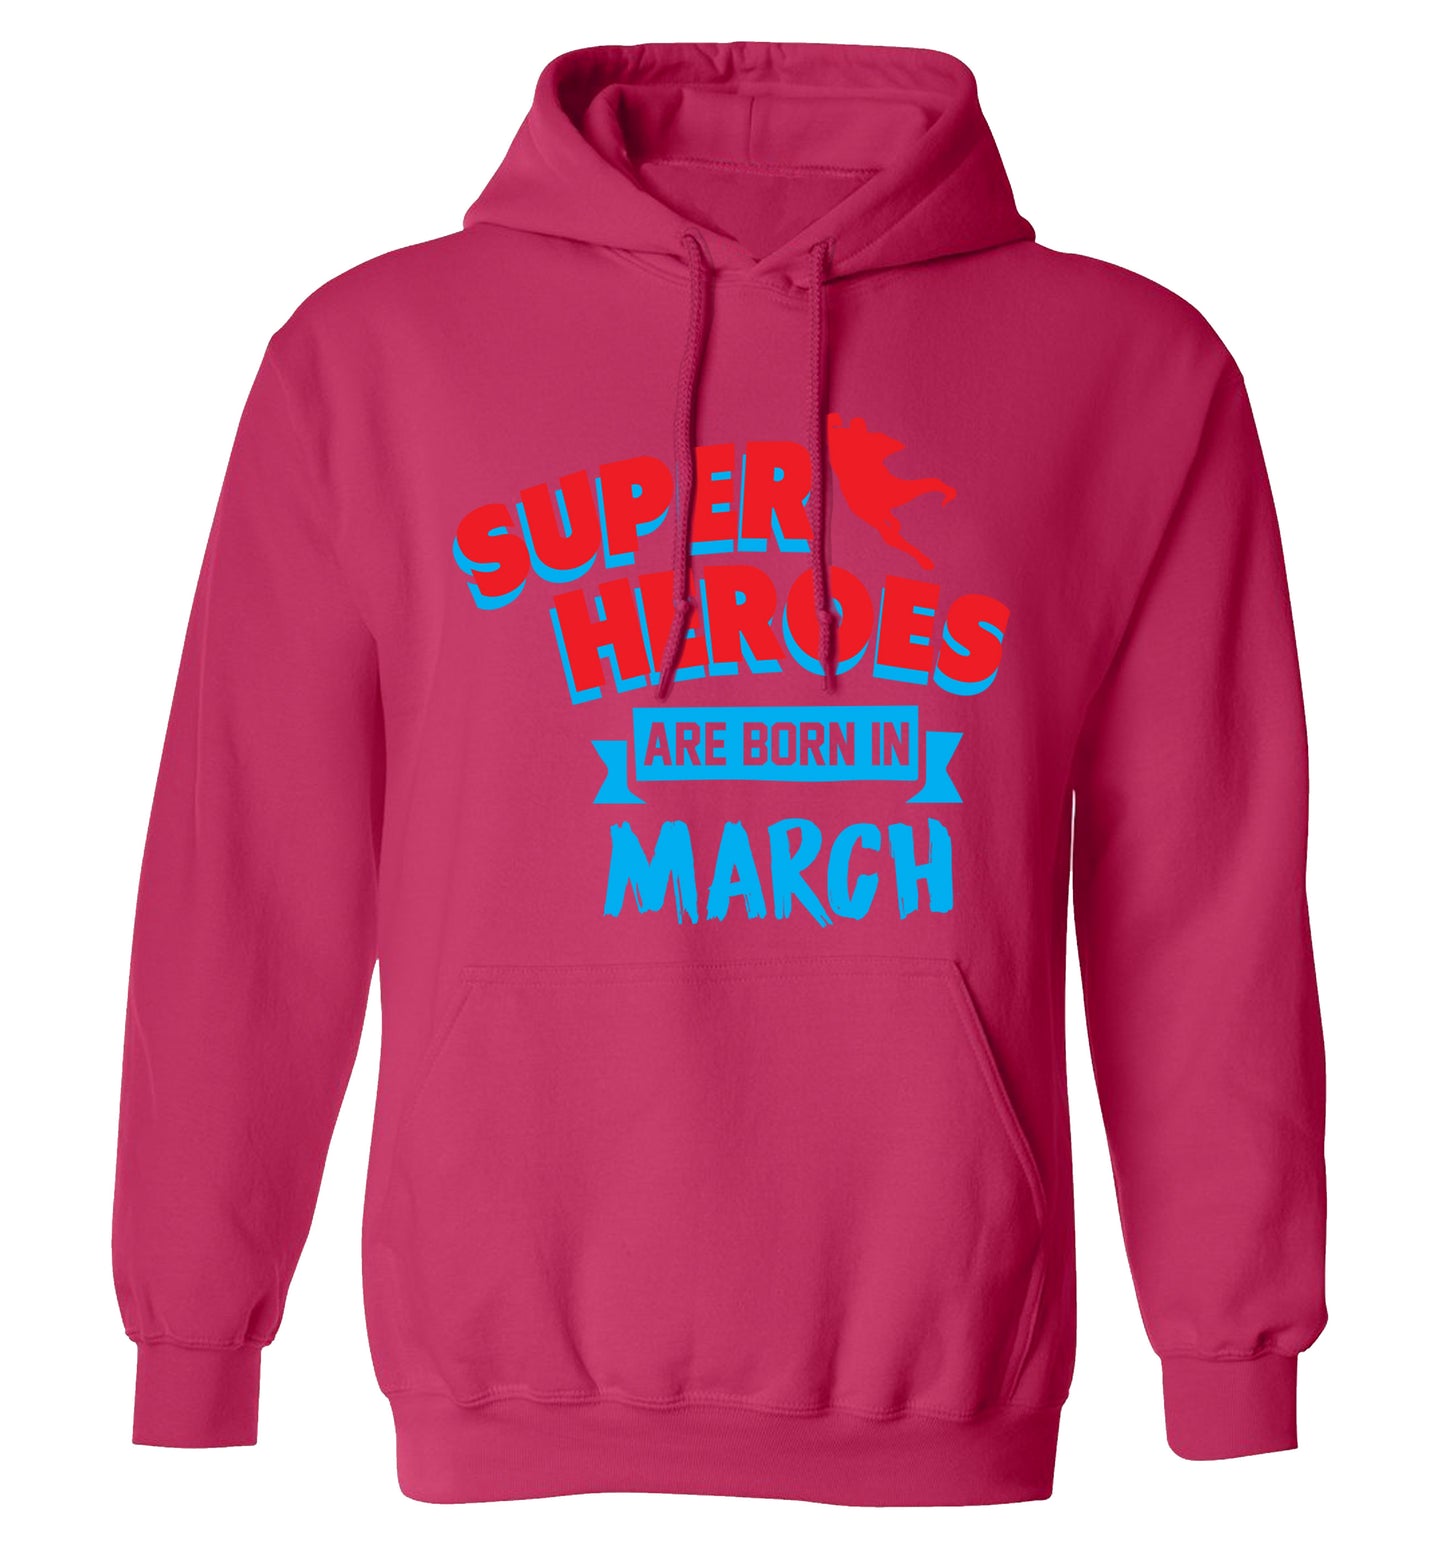 Superheros are born in March adults unisex pink hoodie 2XL